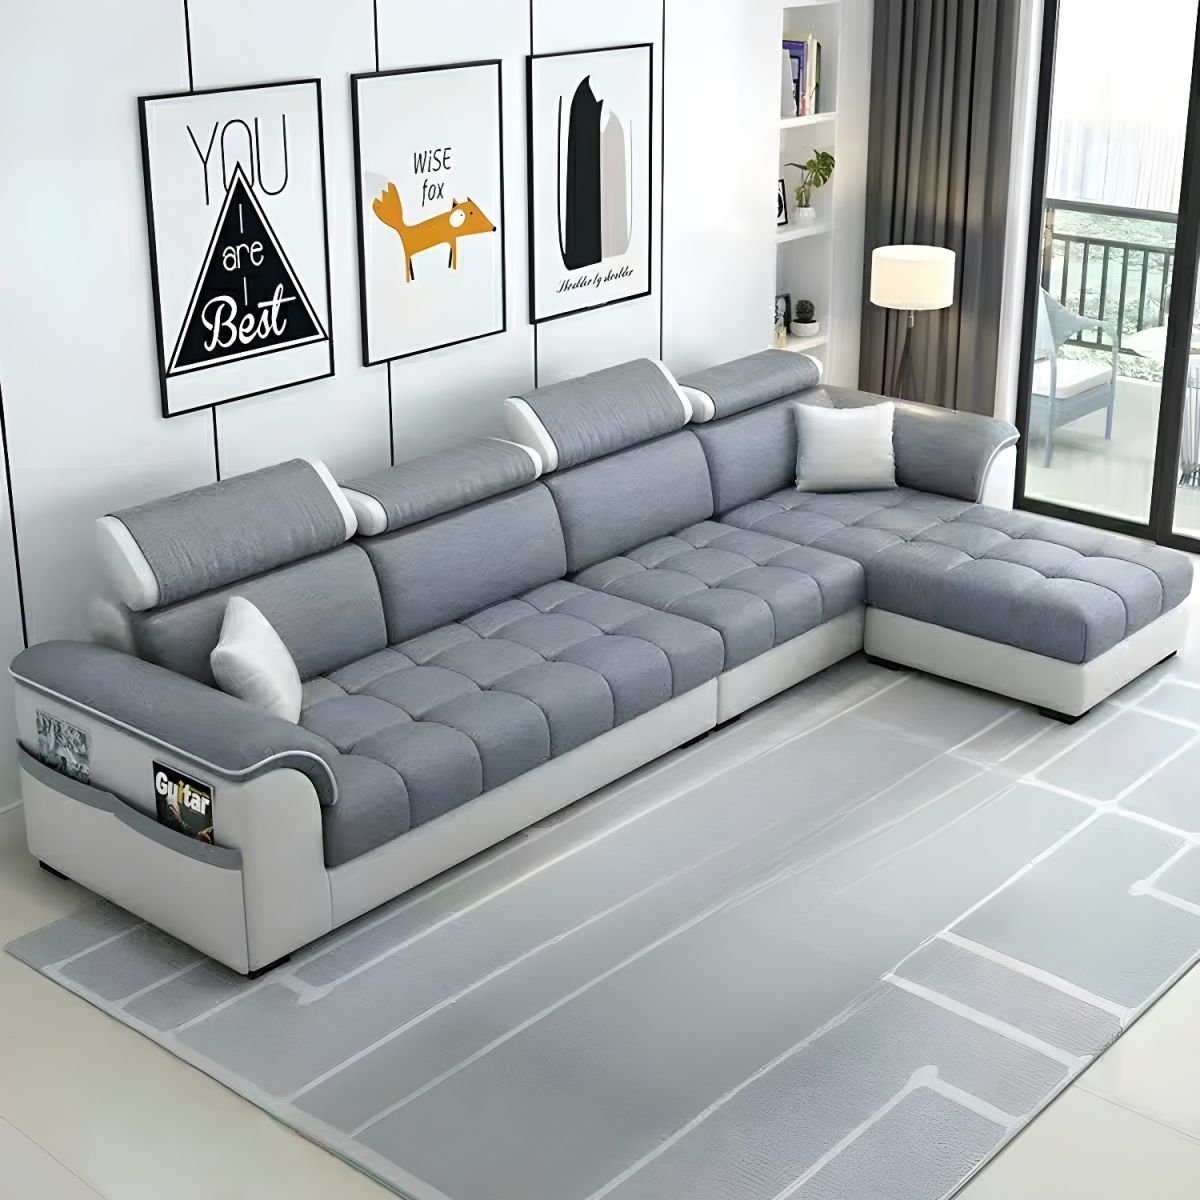 Contemporary L-Shaped Sectional Sofa with Adjustable Pillows and Storage - Tech Cloth Light Gray